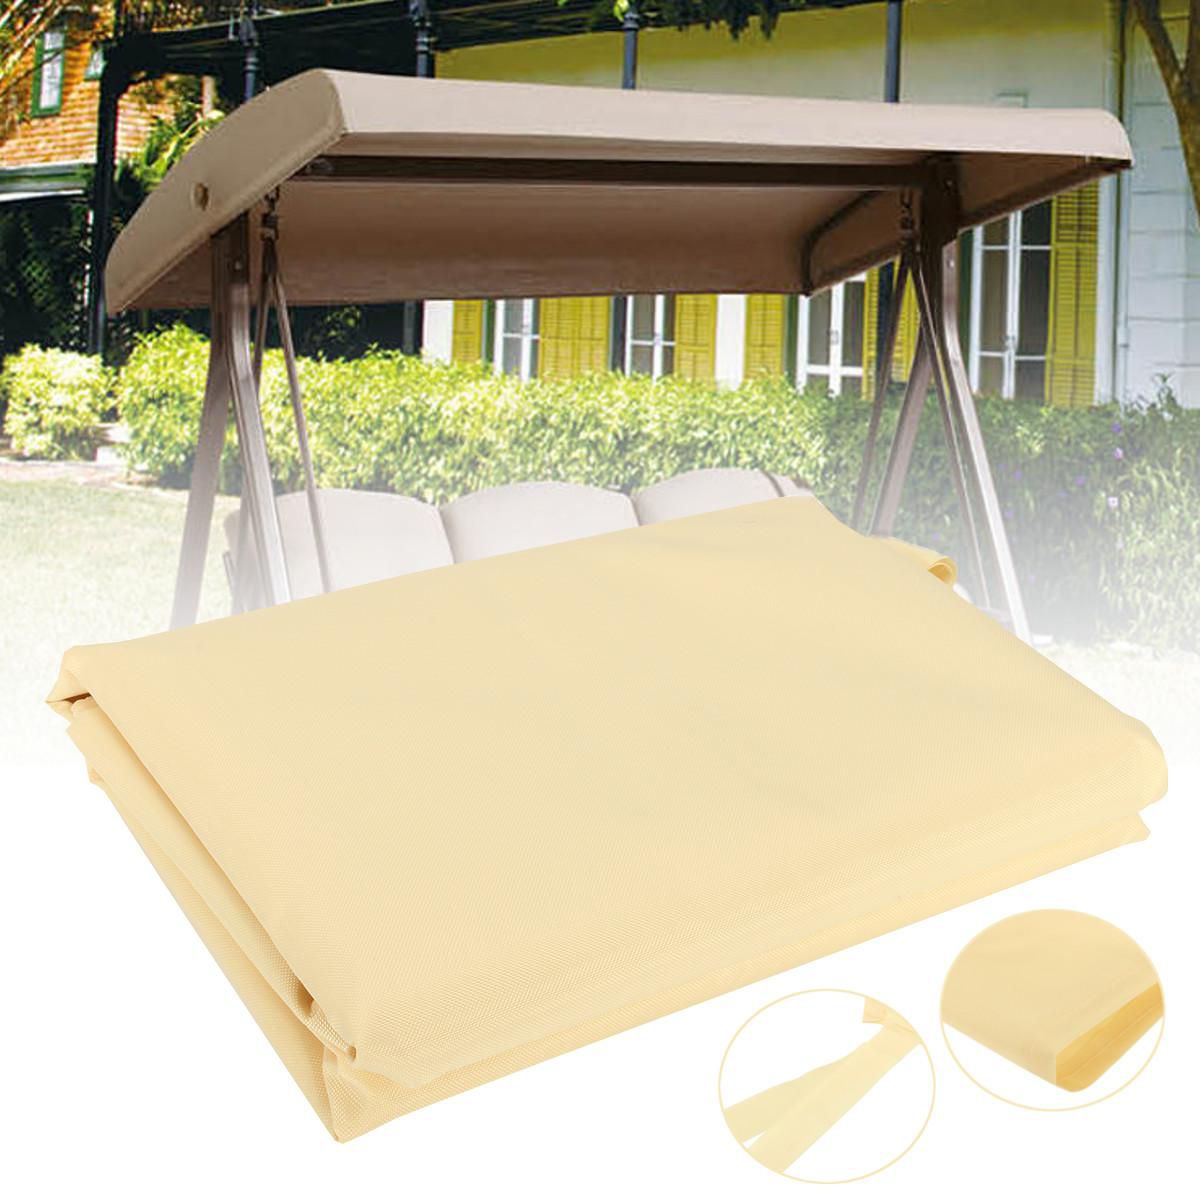 Buy Swing Top Cover Replacement Canopy Porch Park Patio Outdoor Garden